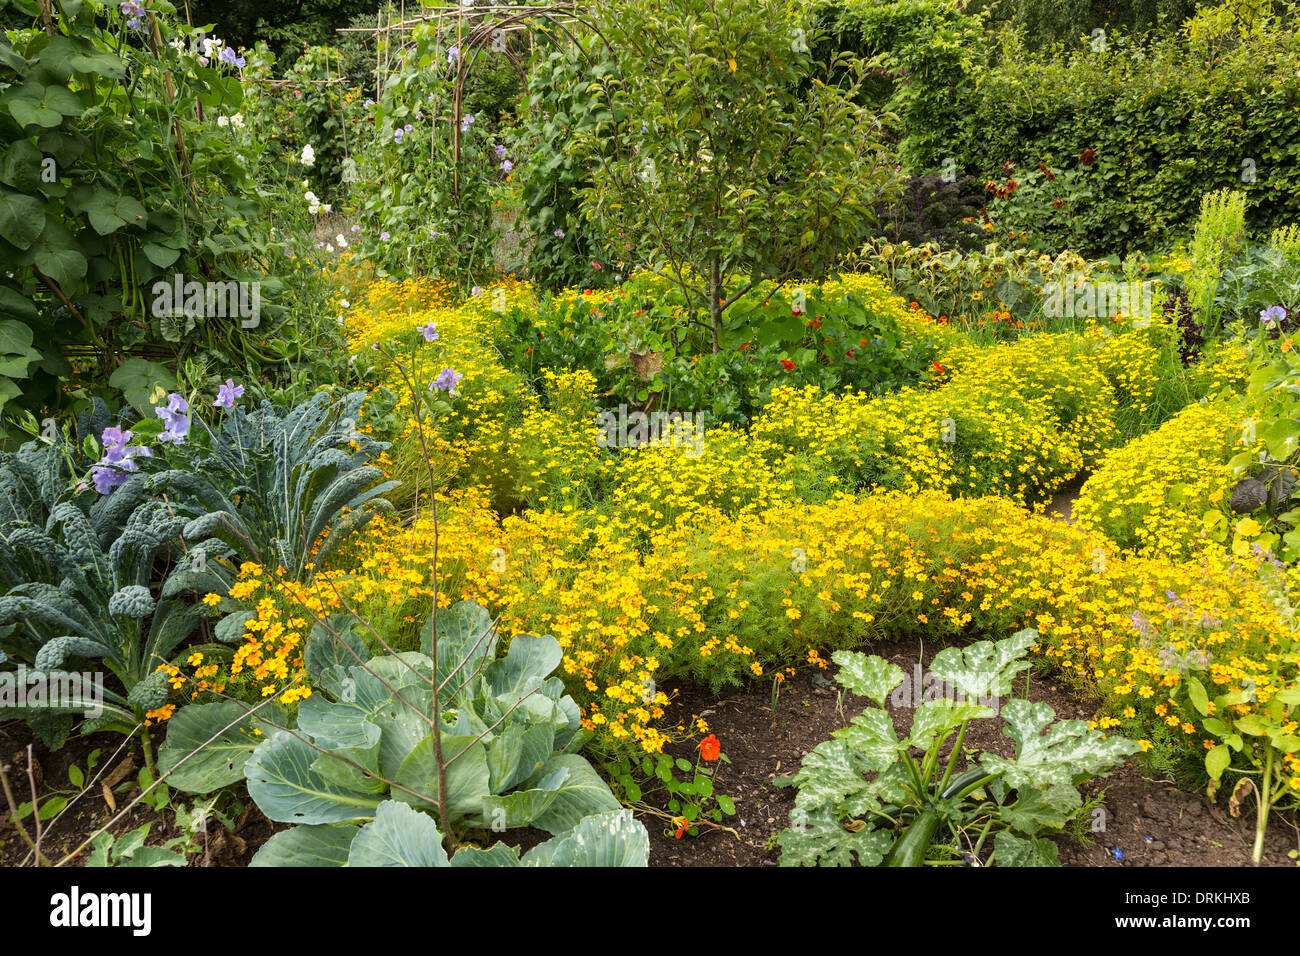 Potager, vegetable and flower garden, England Stock Photo